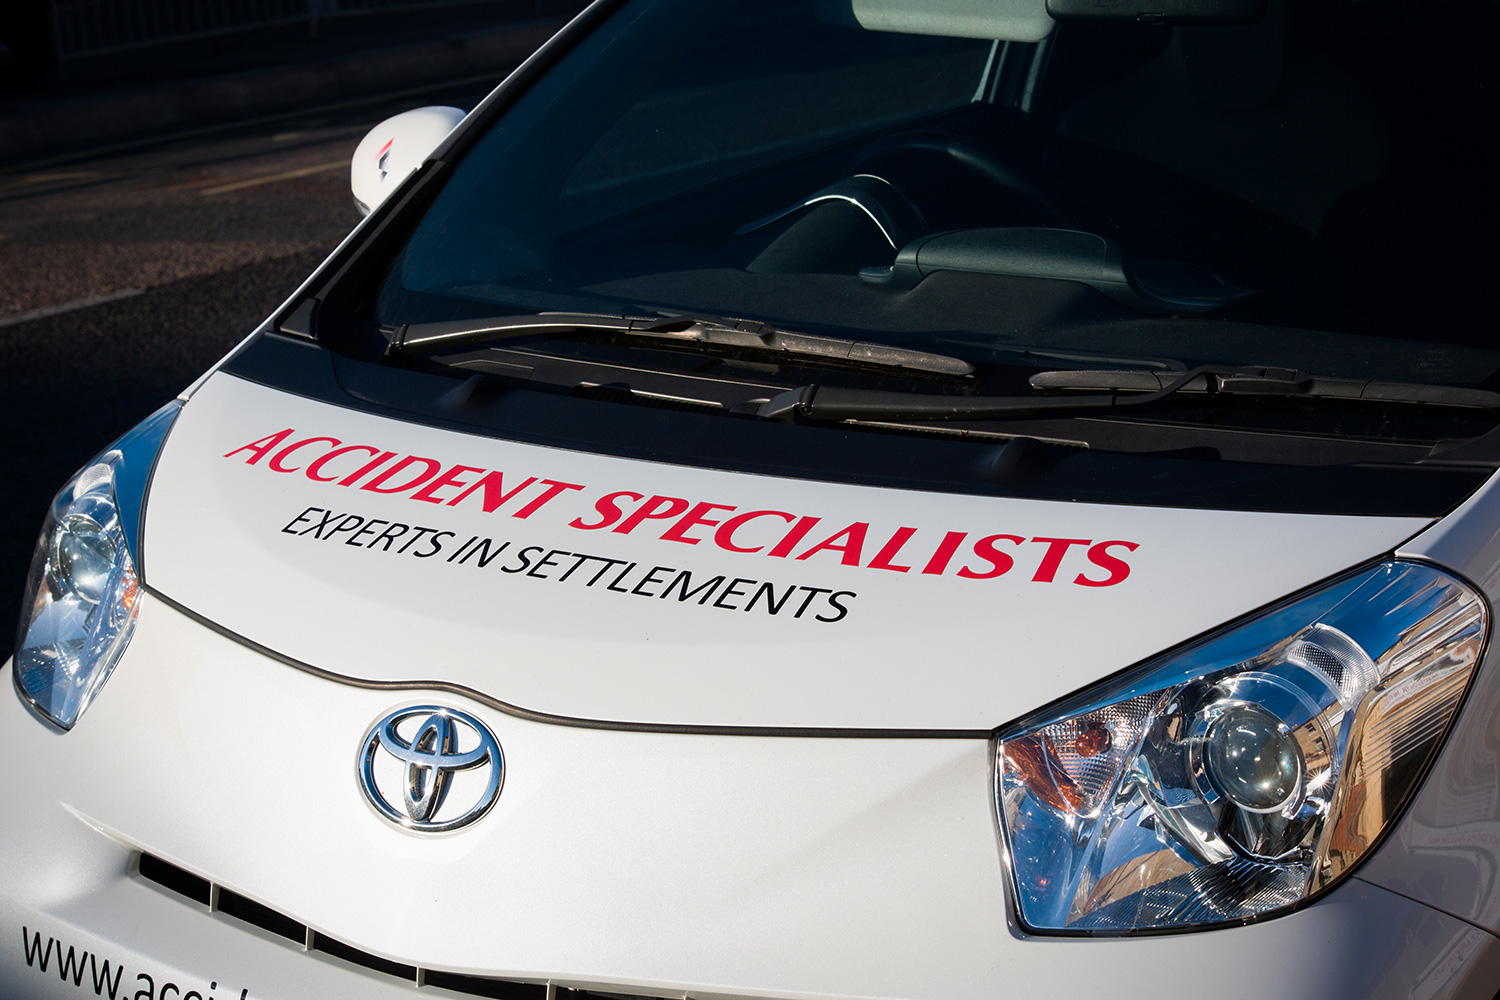 Accident Specialists franchise — an accident claims business opportunity